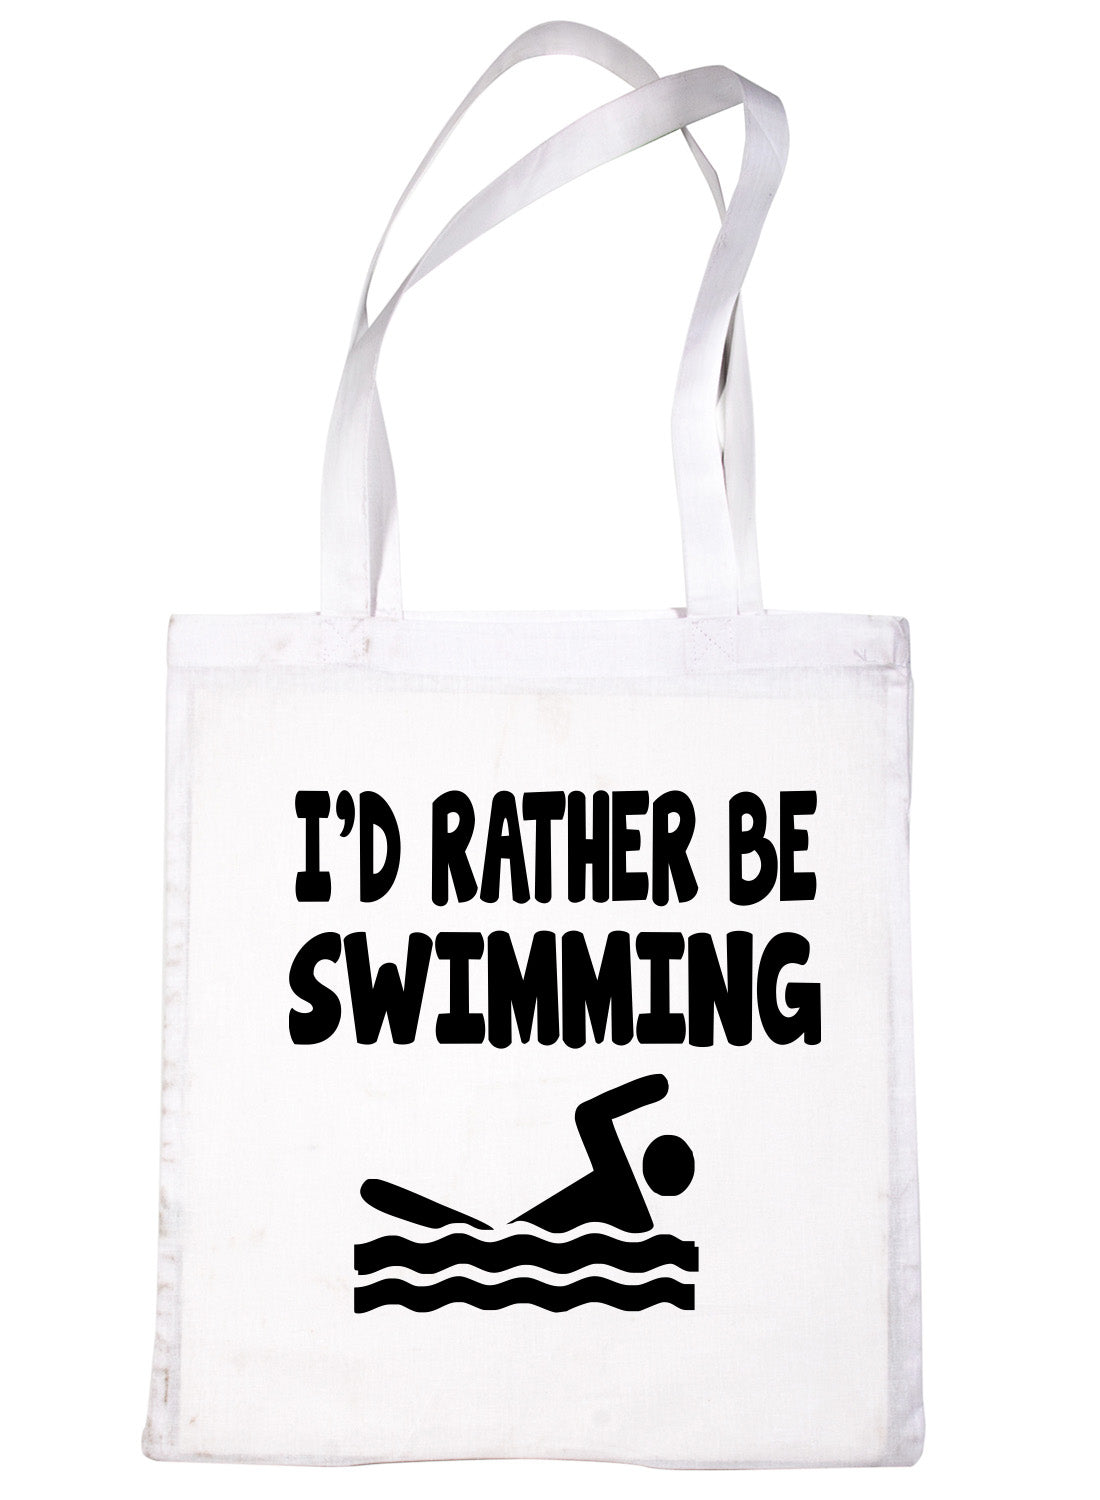 I'd Rather Be Swimming Swimmer Shopping Tote Bag Ladies Gift